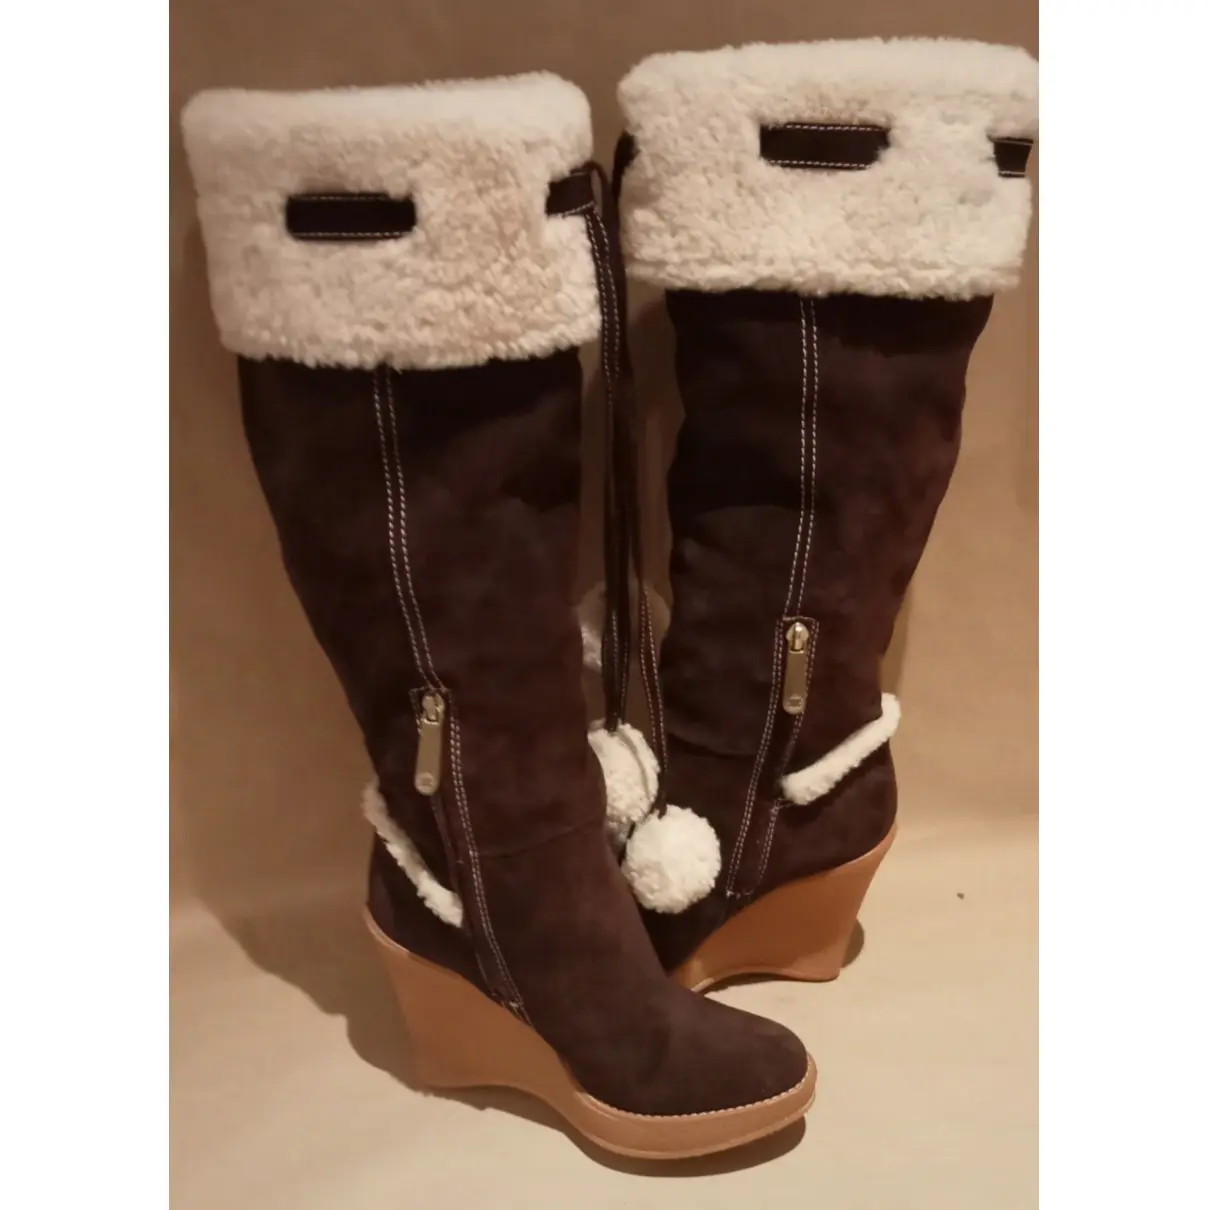 Buy Bally Snow boots online